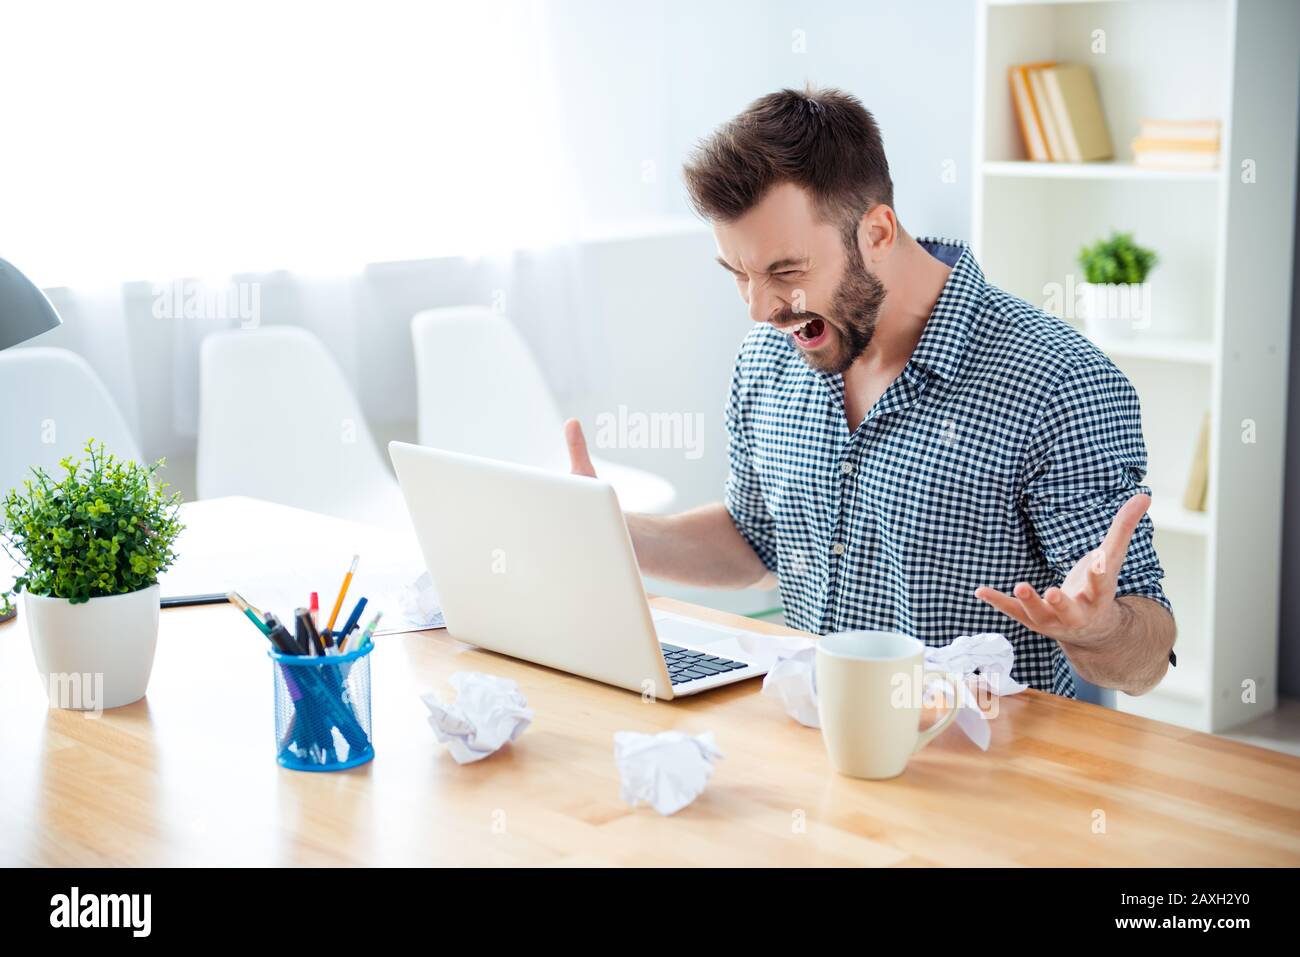 angry man in rage having bad mood screaming in office Stock Photo